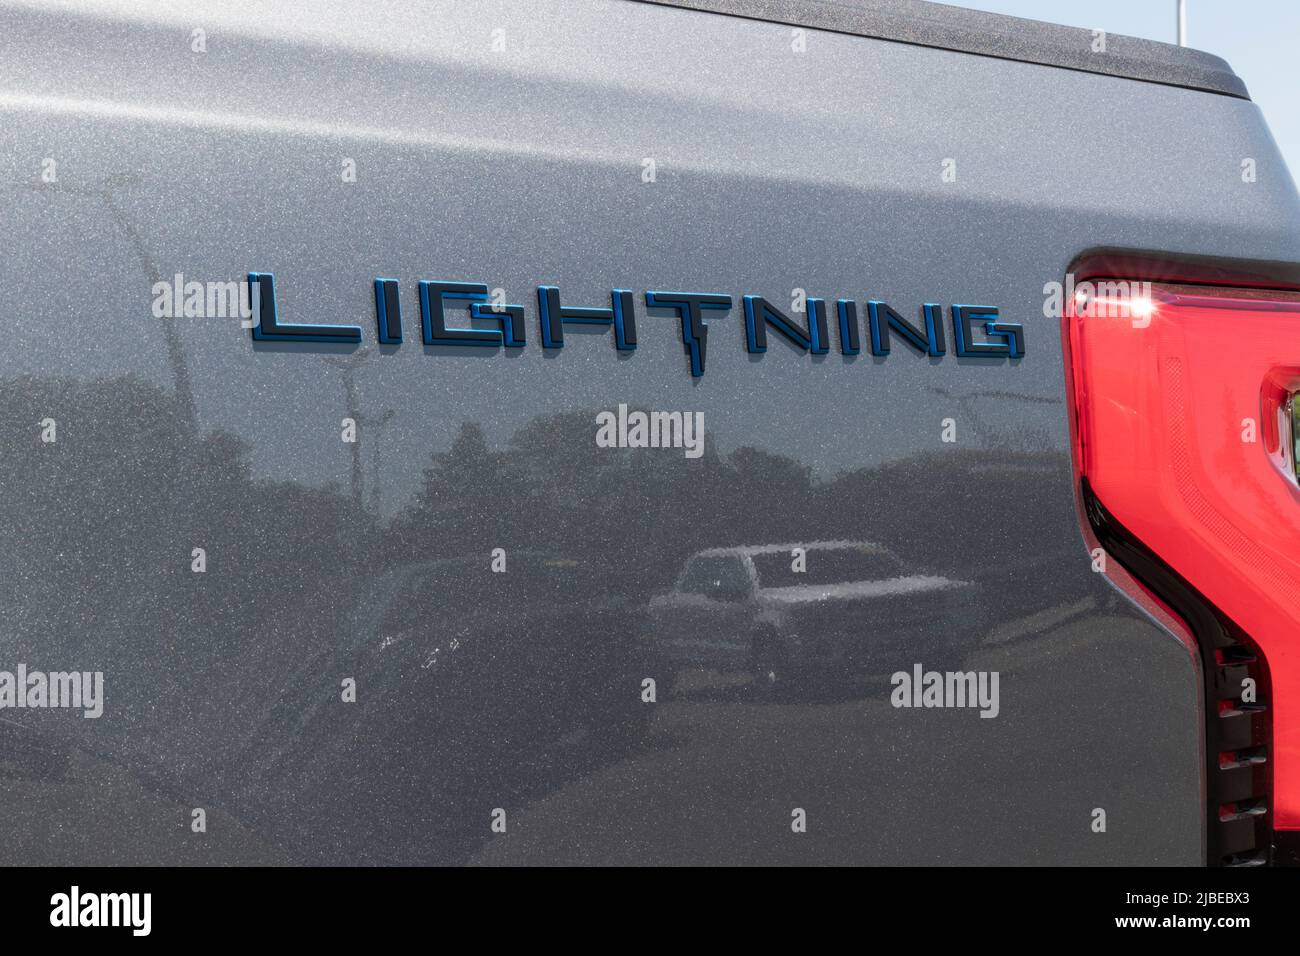 Marion - Circa June 2022: Ford F-150 Lightning display. Ford offers the F150 Lightning all-electric truck in Pro, XLT, Lariat, and Platinum models. Stock Photo